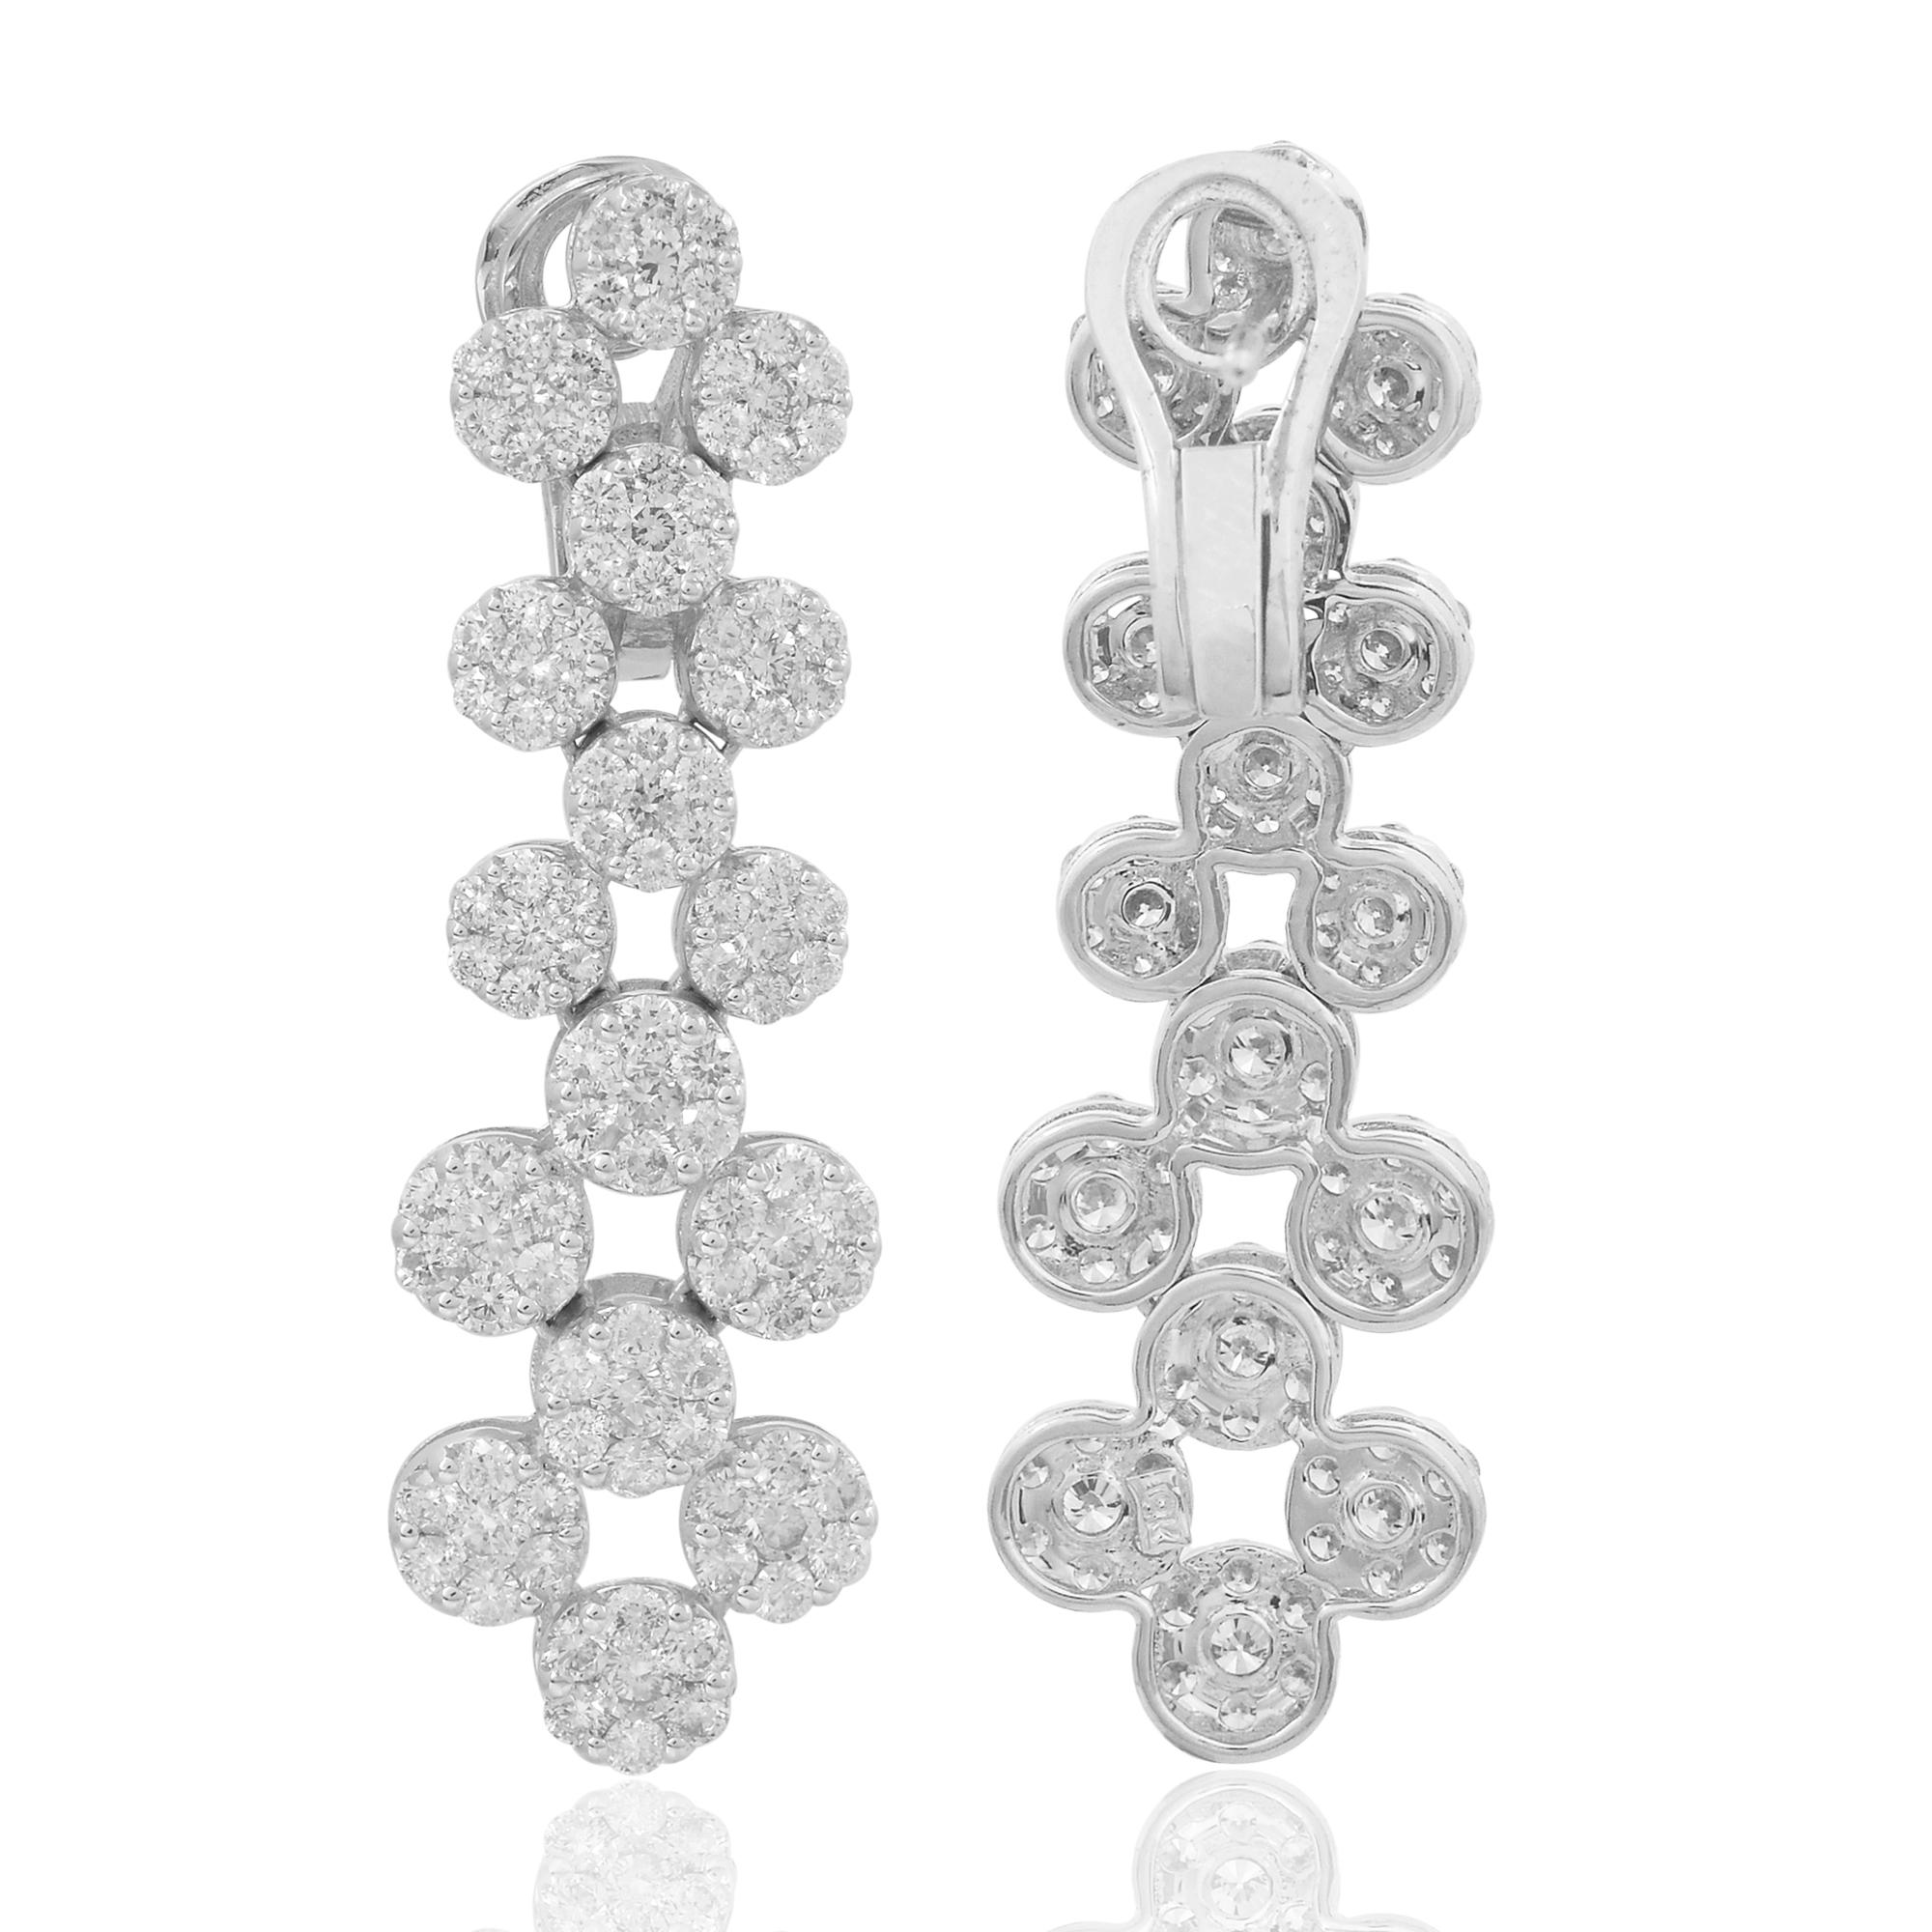 Item Code :- CN-24444
Gross Wt. :- 11.39 gm
18k Gold Wt. :- 10.37 gm
Diamond Wt. :- 5.10 Ct. ( AVERAGE DIAMOND CLARITY SI1-SI2 & COLOR H-I )
Earrings Size :- 43.03 x 13.22 x 3.70 mm approx.

✦ Sizing
.....................
We can adjust most items to